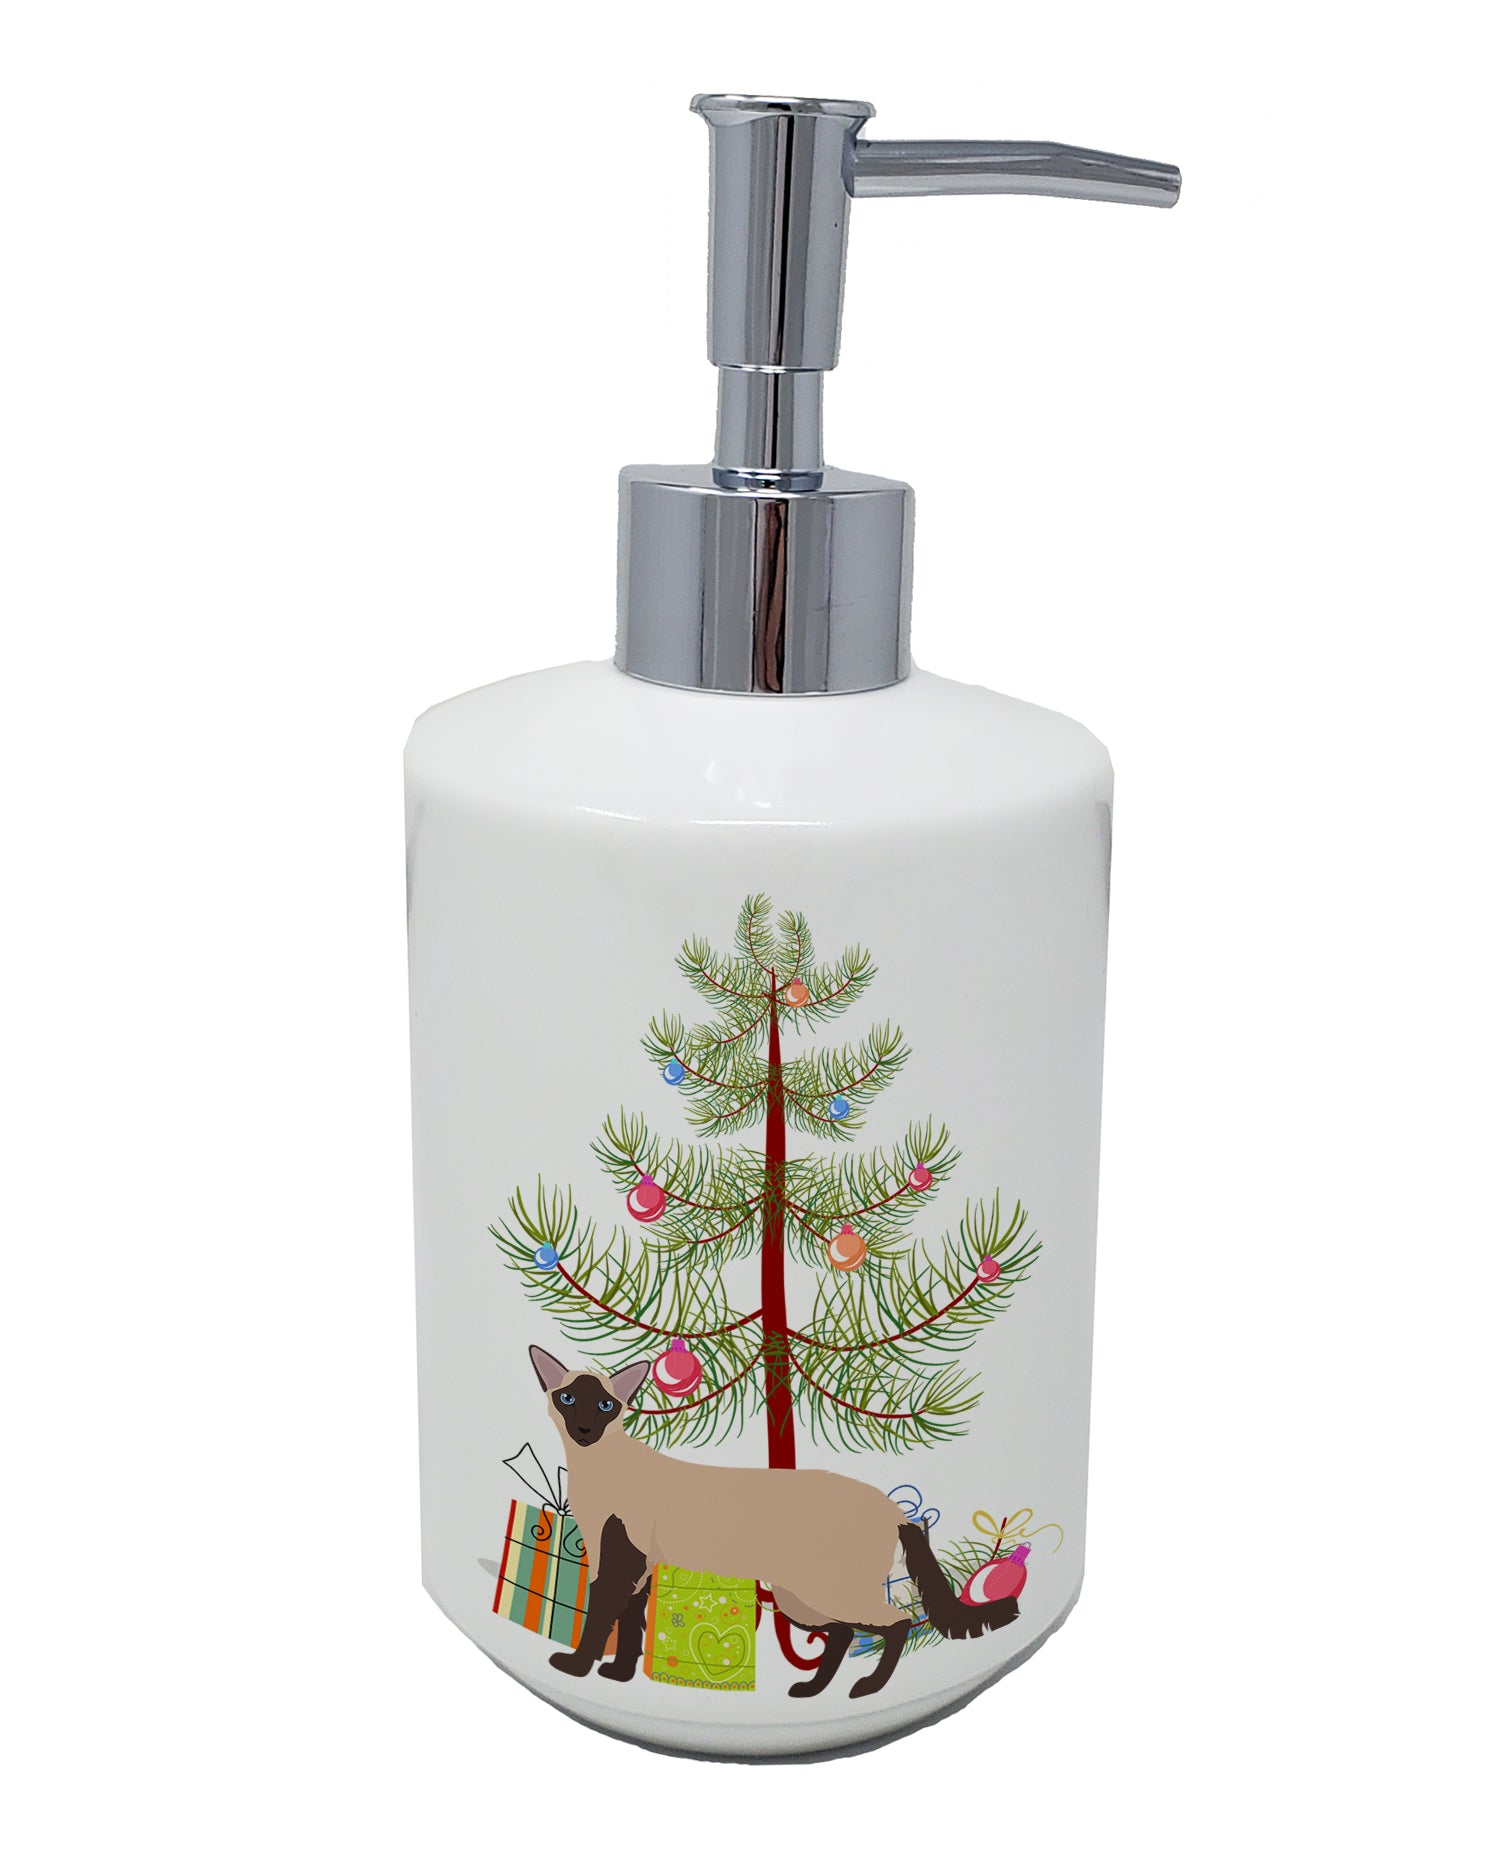 Buy this Colorpoint Longhair Cat Merry Christmas Ceramic Soap Dispenser